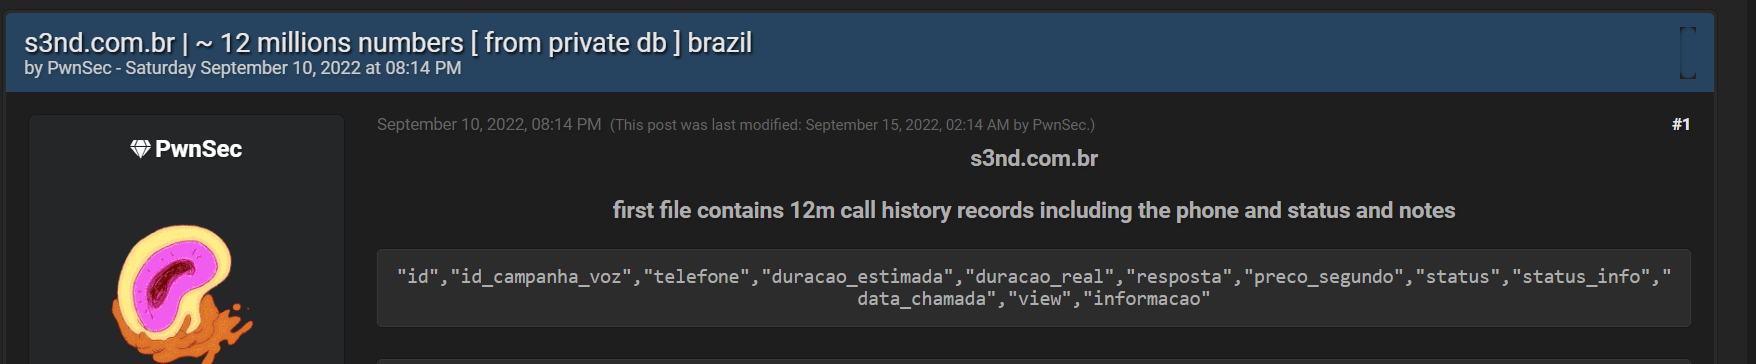 This example includes a database of 12 million phone numbers of Brazilians that were leaked on hacker forum Breached.co. This database is readily available for use by a threat actor who would like to launch a smishing attack against these leaked phone numbers.